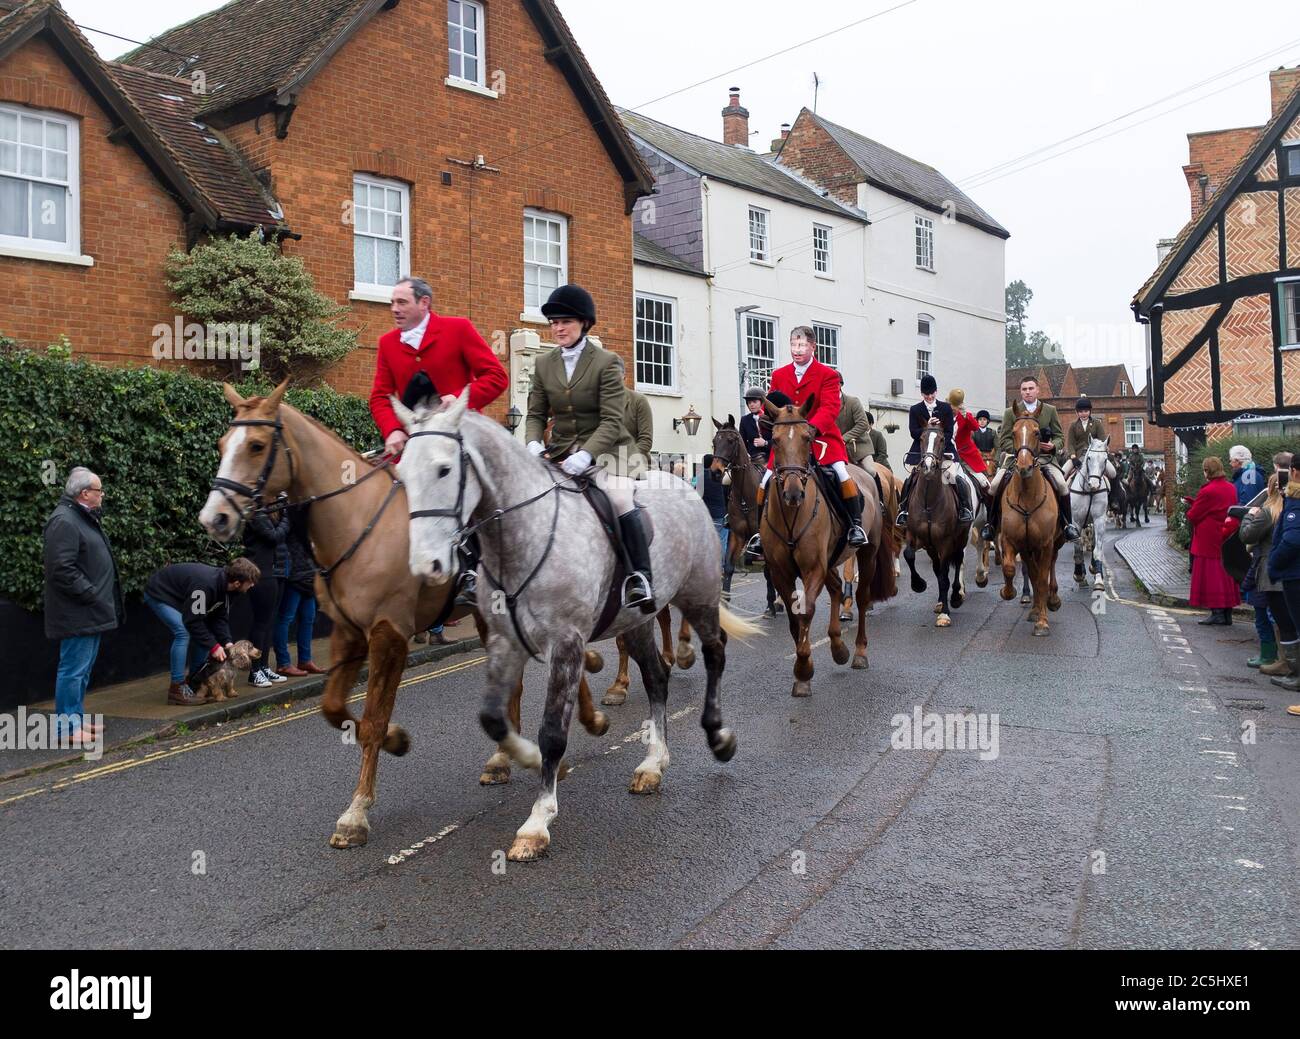 WINSLOW, UK - December 26, 2018. Men and women riding on horseback in a traditional fox hunt on Boxing Day in England Stock Photo